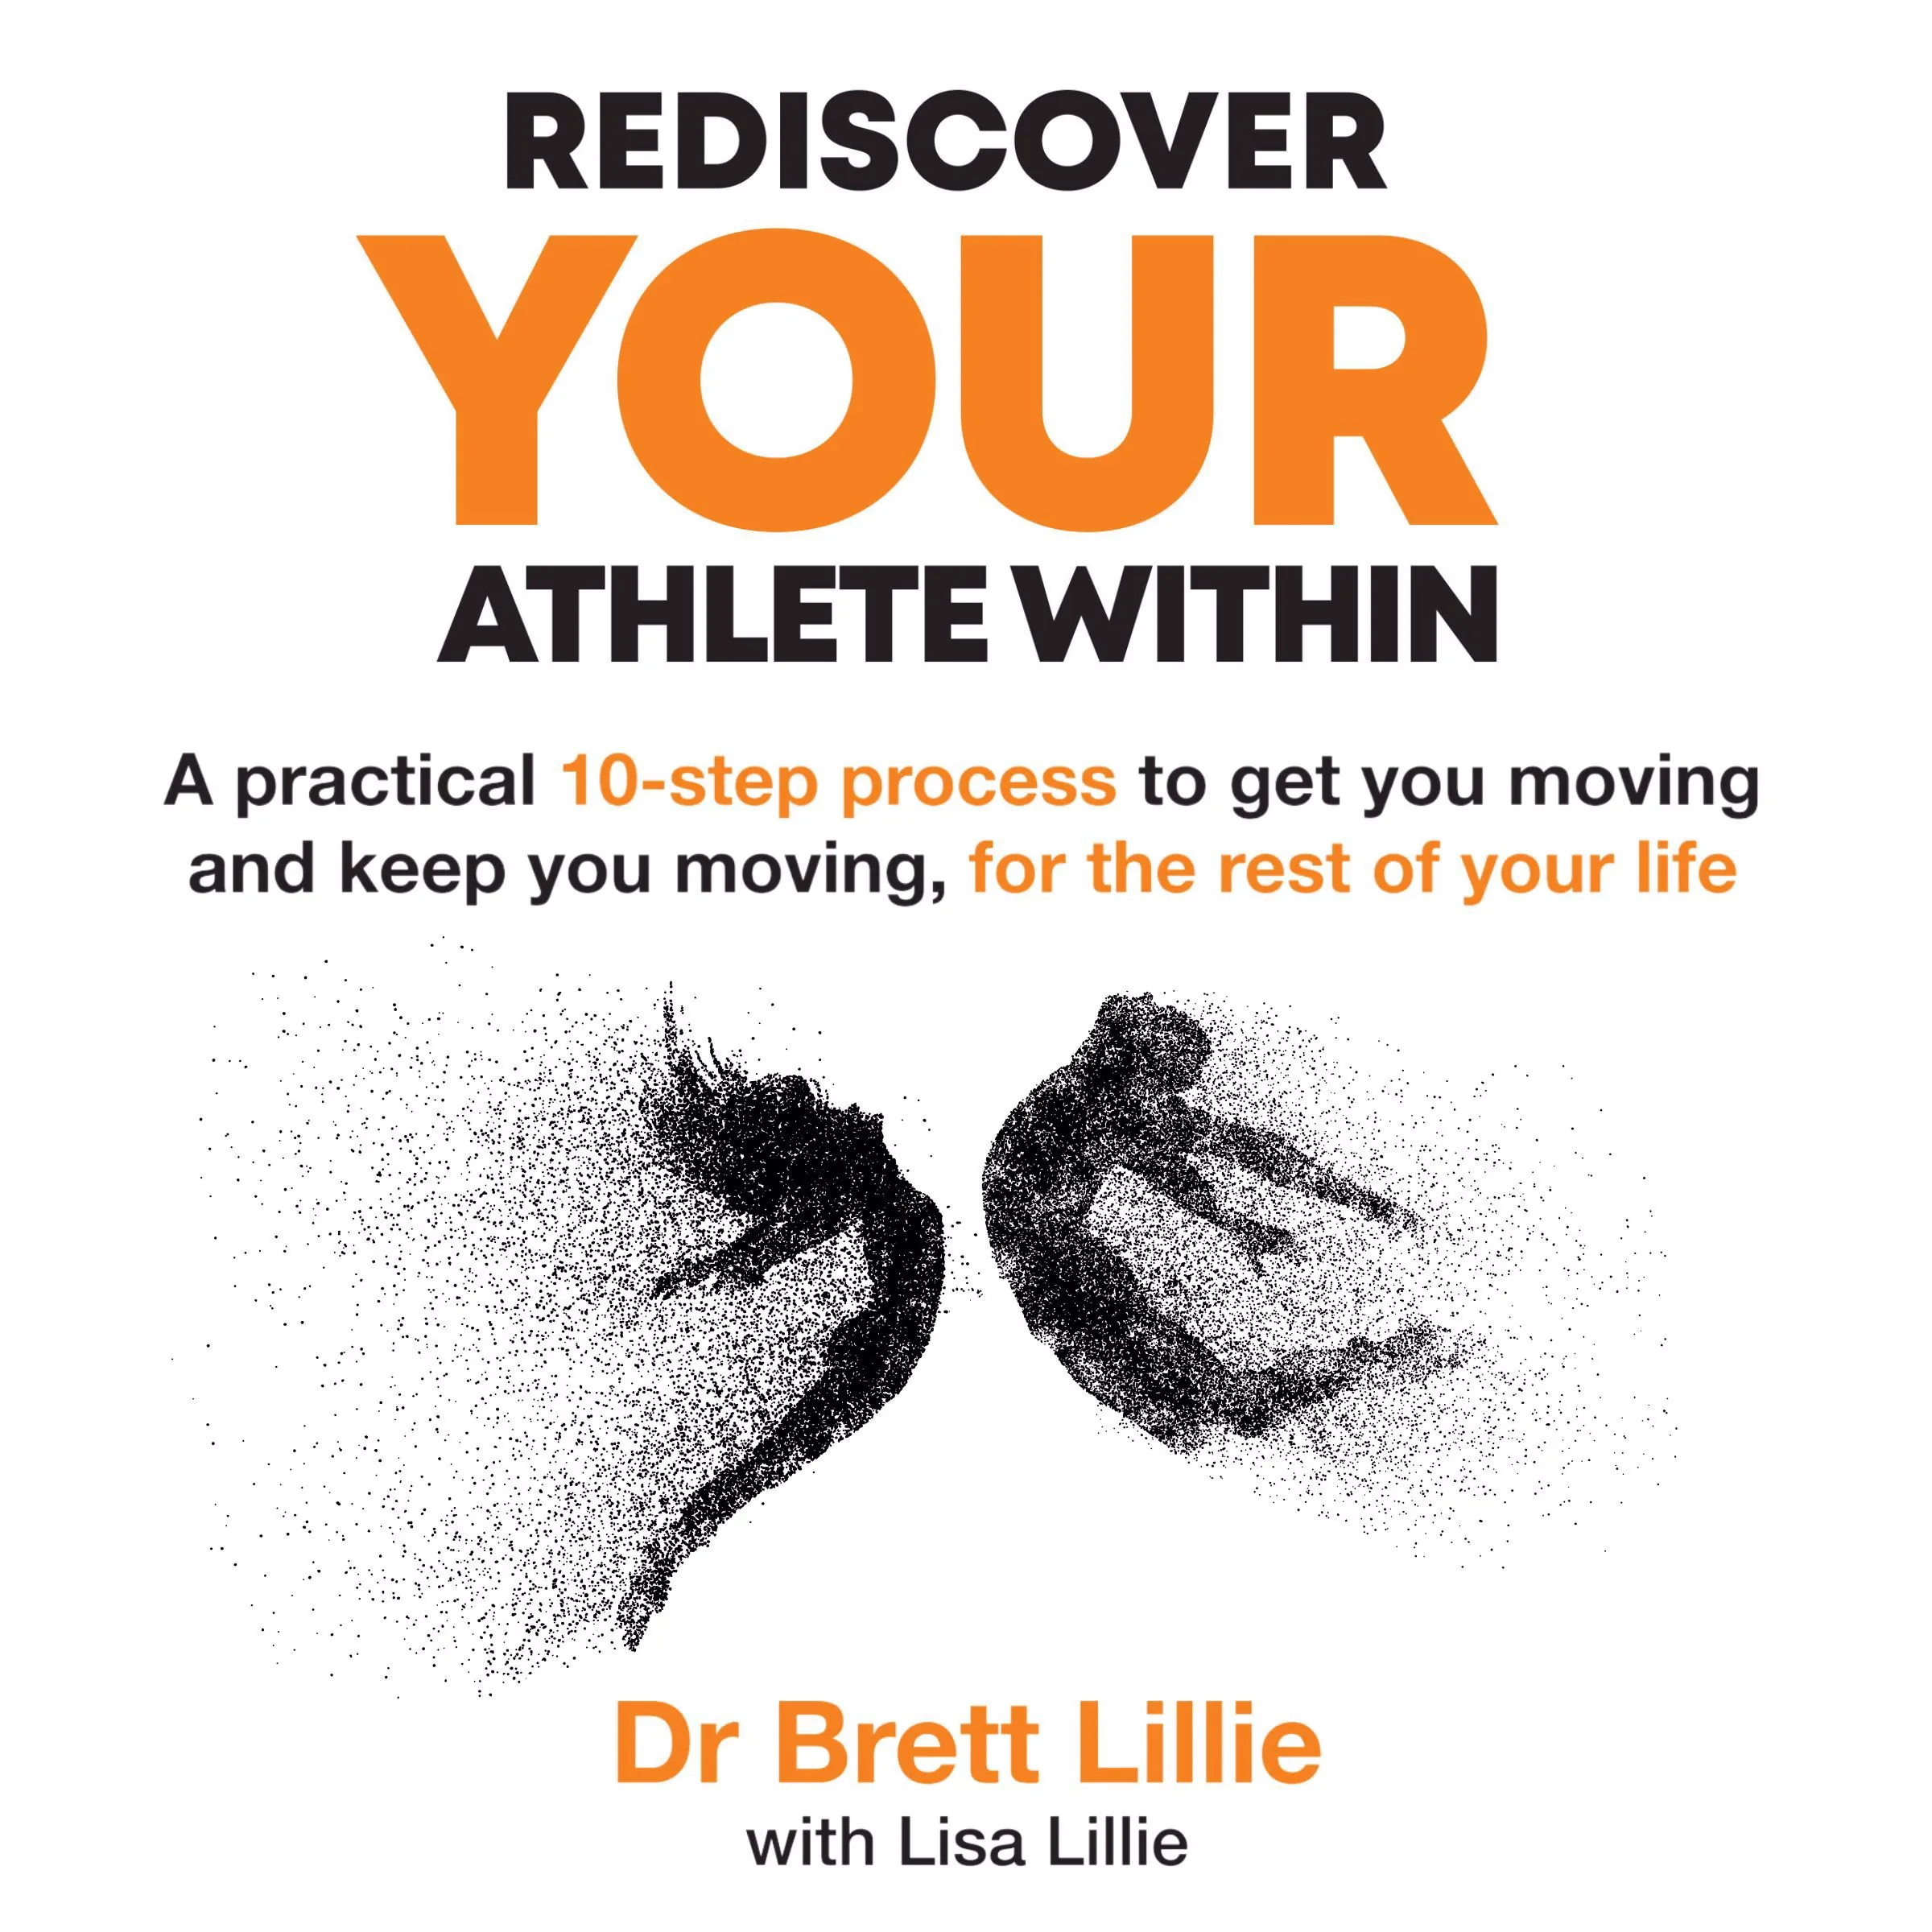 Rediscover YOUR Athlete Within by Lisa Lillie Audiobook